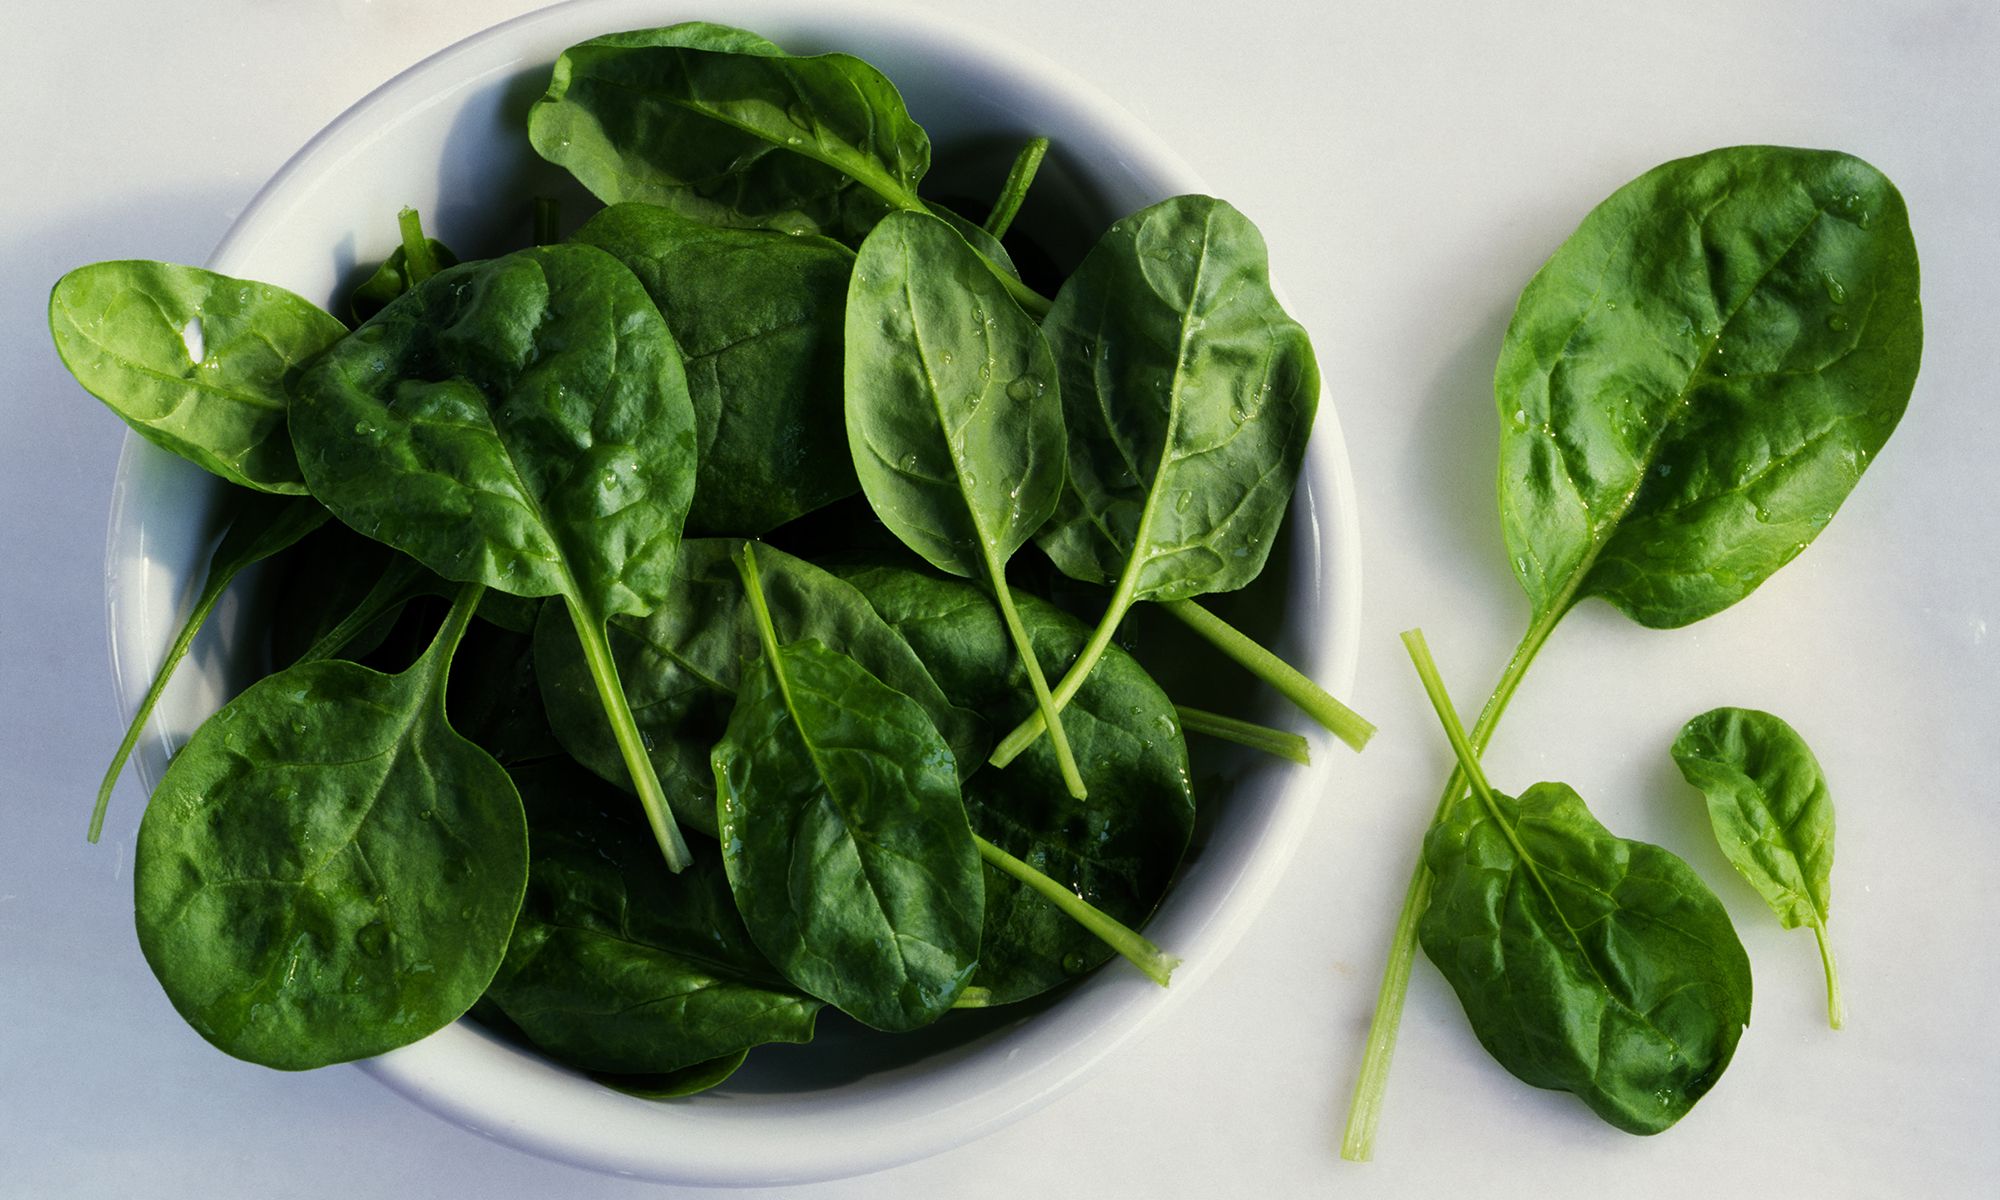 how much iron does spinach contain and is spinach really a good source of iron